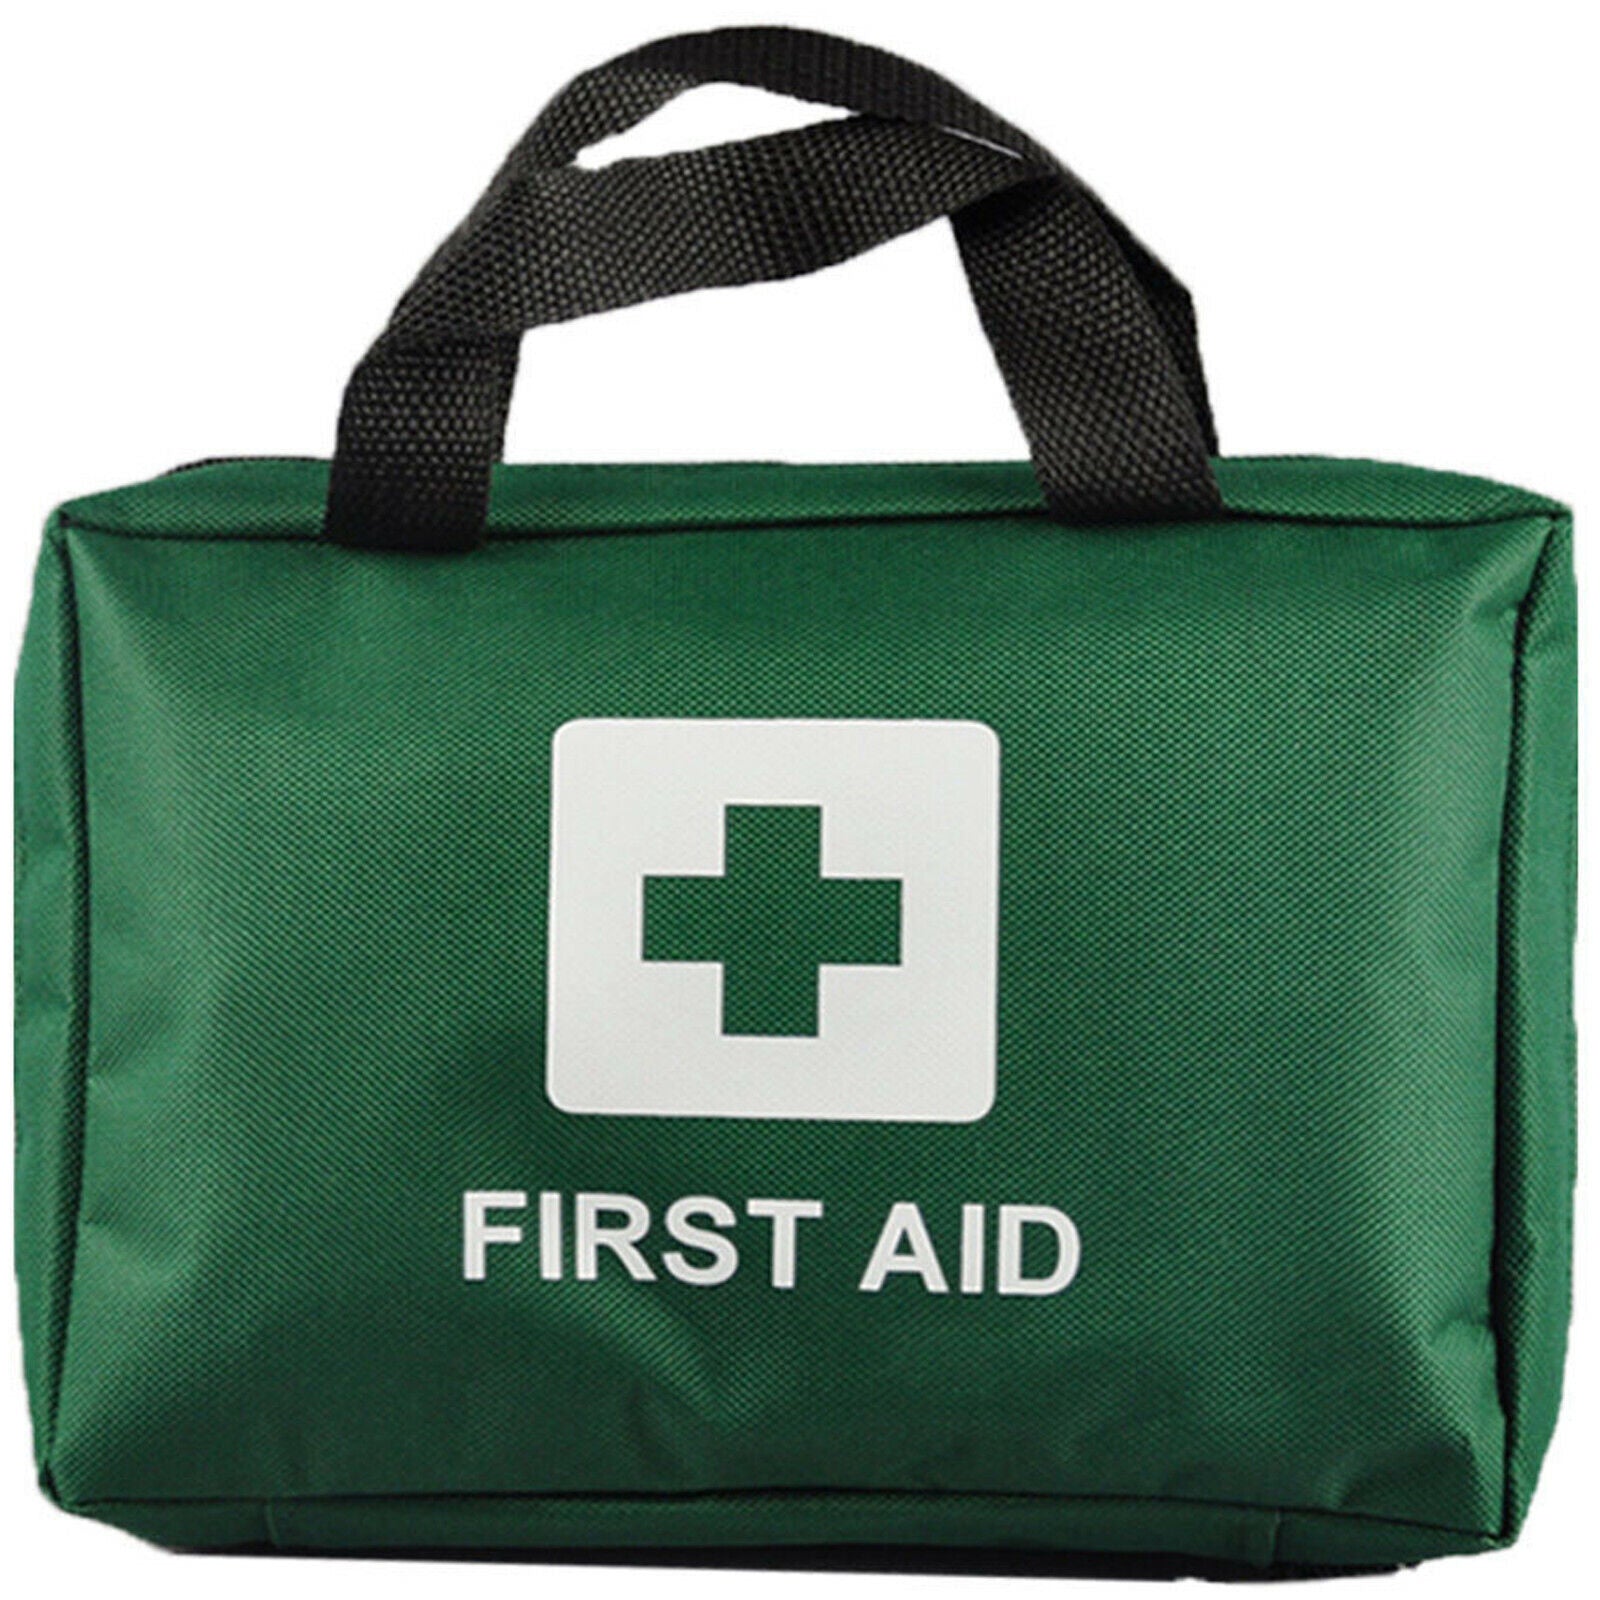 first aid travel kit